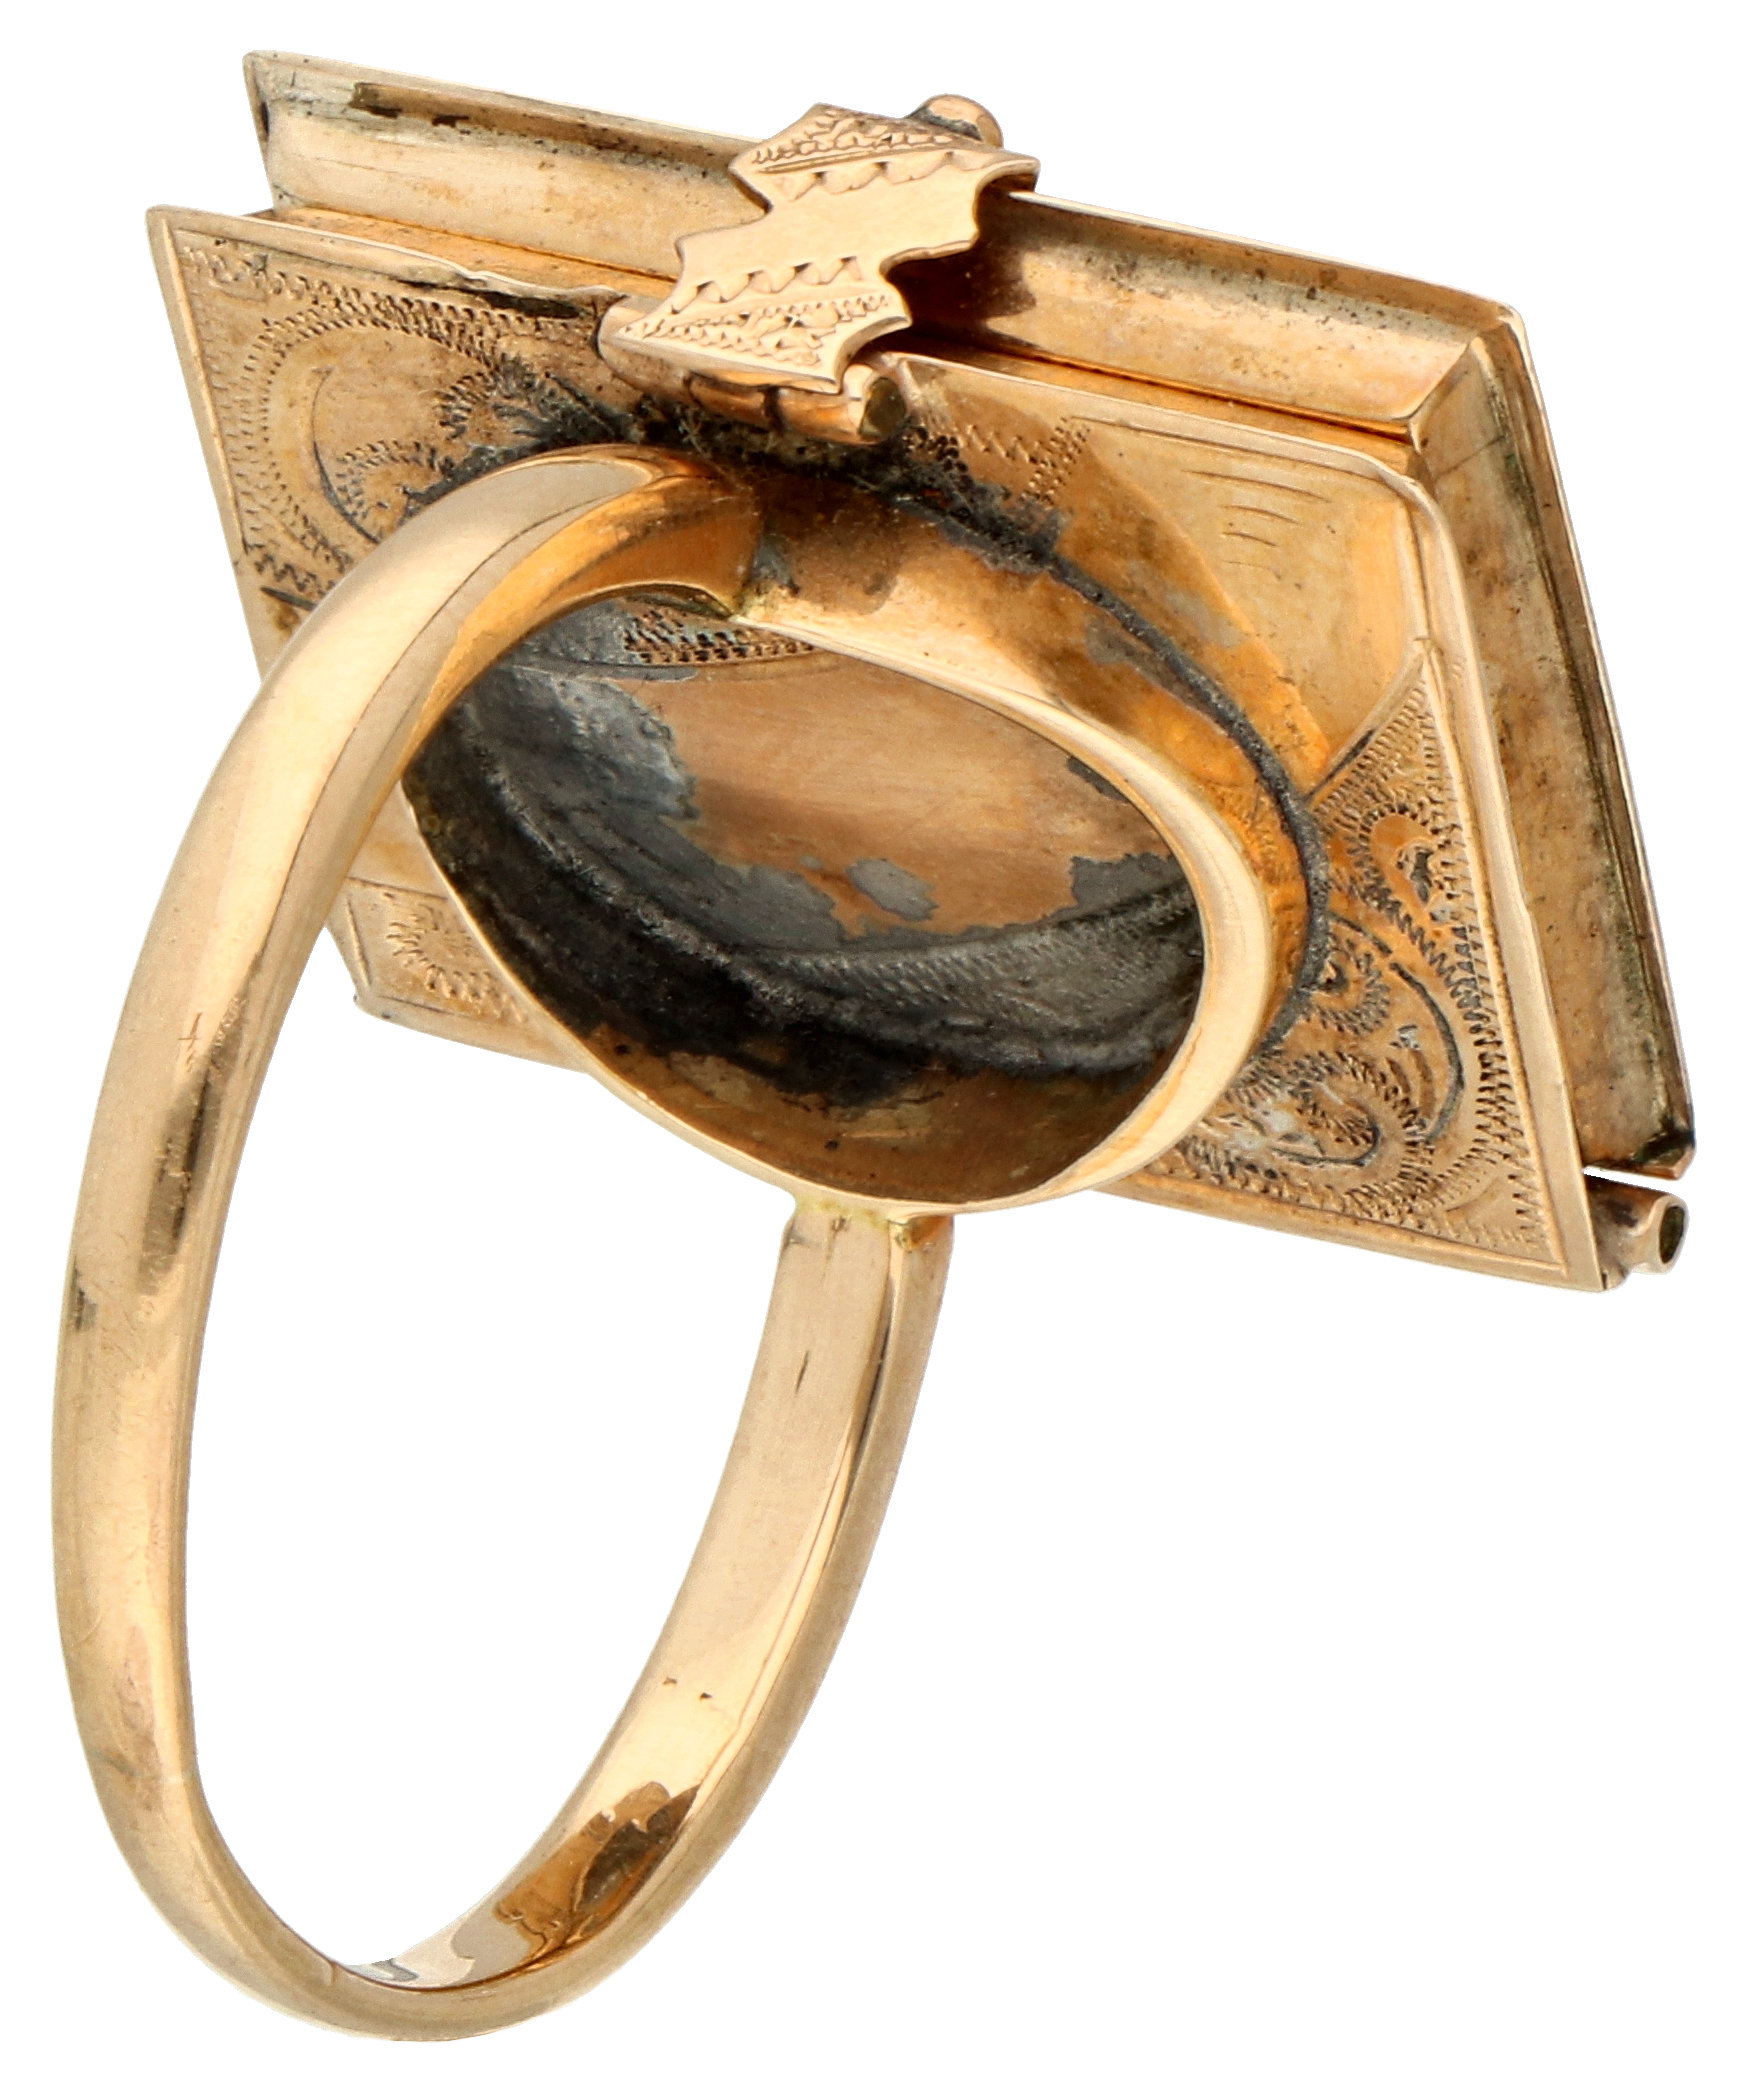 No Reserve - 12K Rose gold composite mourning ring with book including photo and hairpiece. - Image 2 of 4